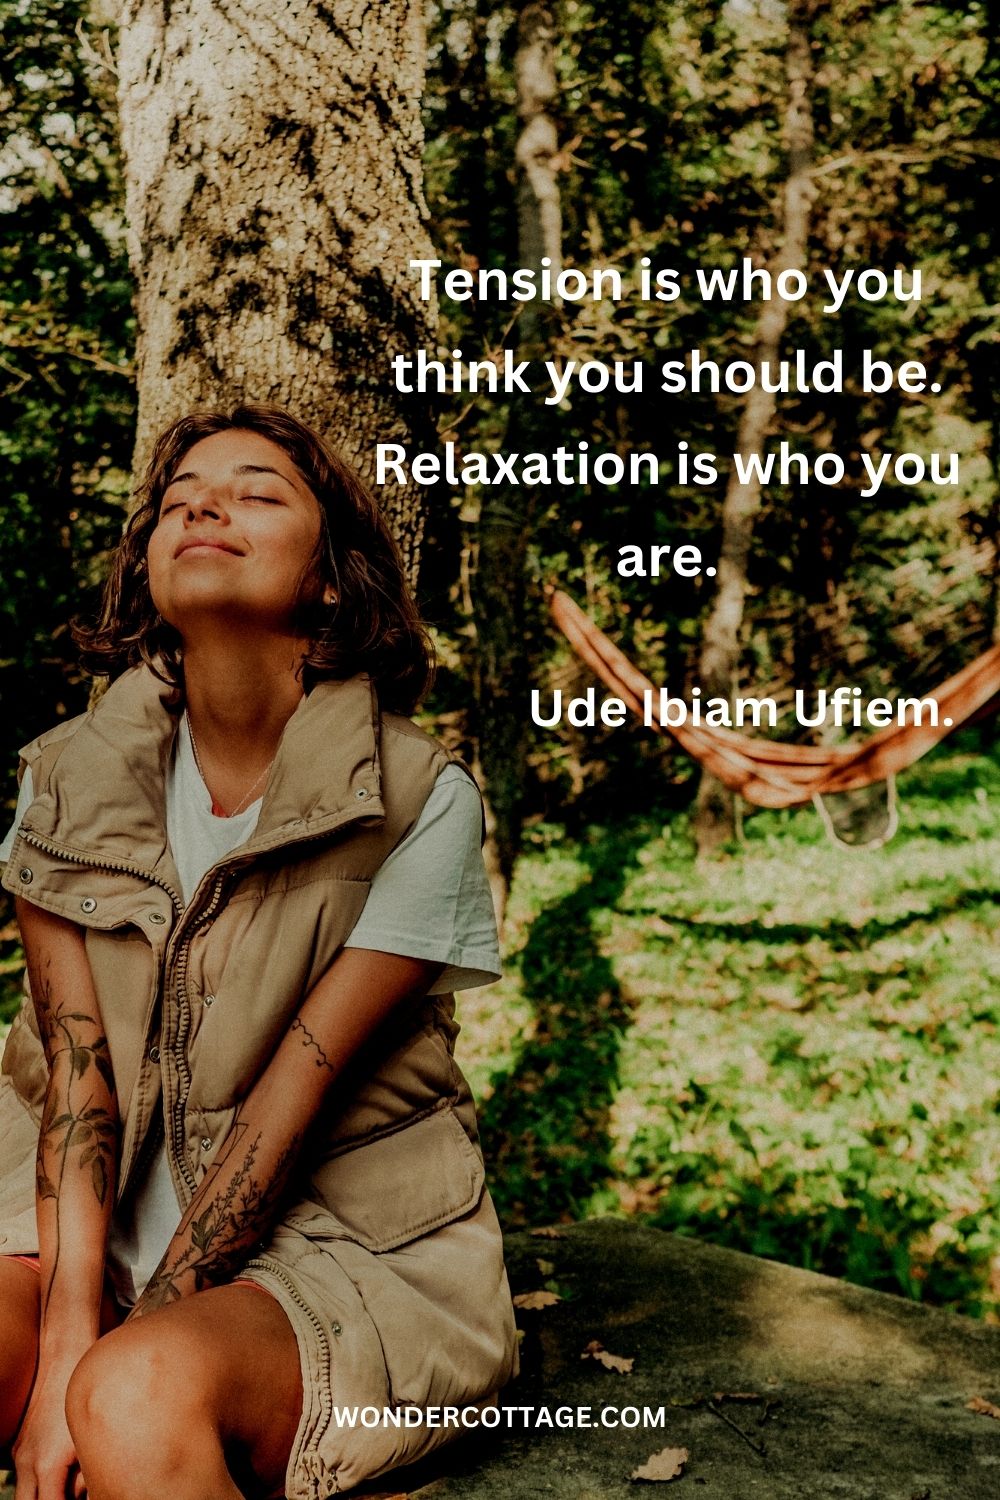 Tension is who you think you should be. Relaxation is who you are. Ude Ibiam Ufiem.